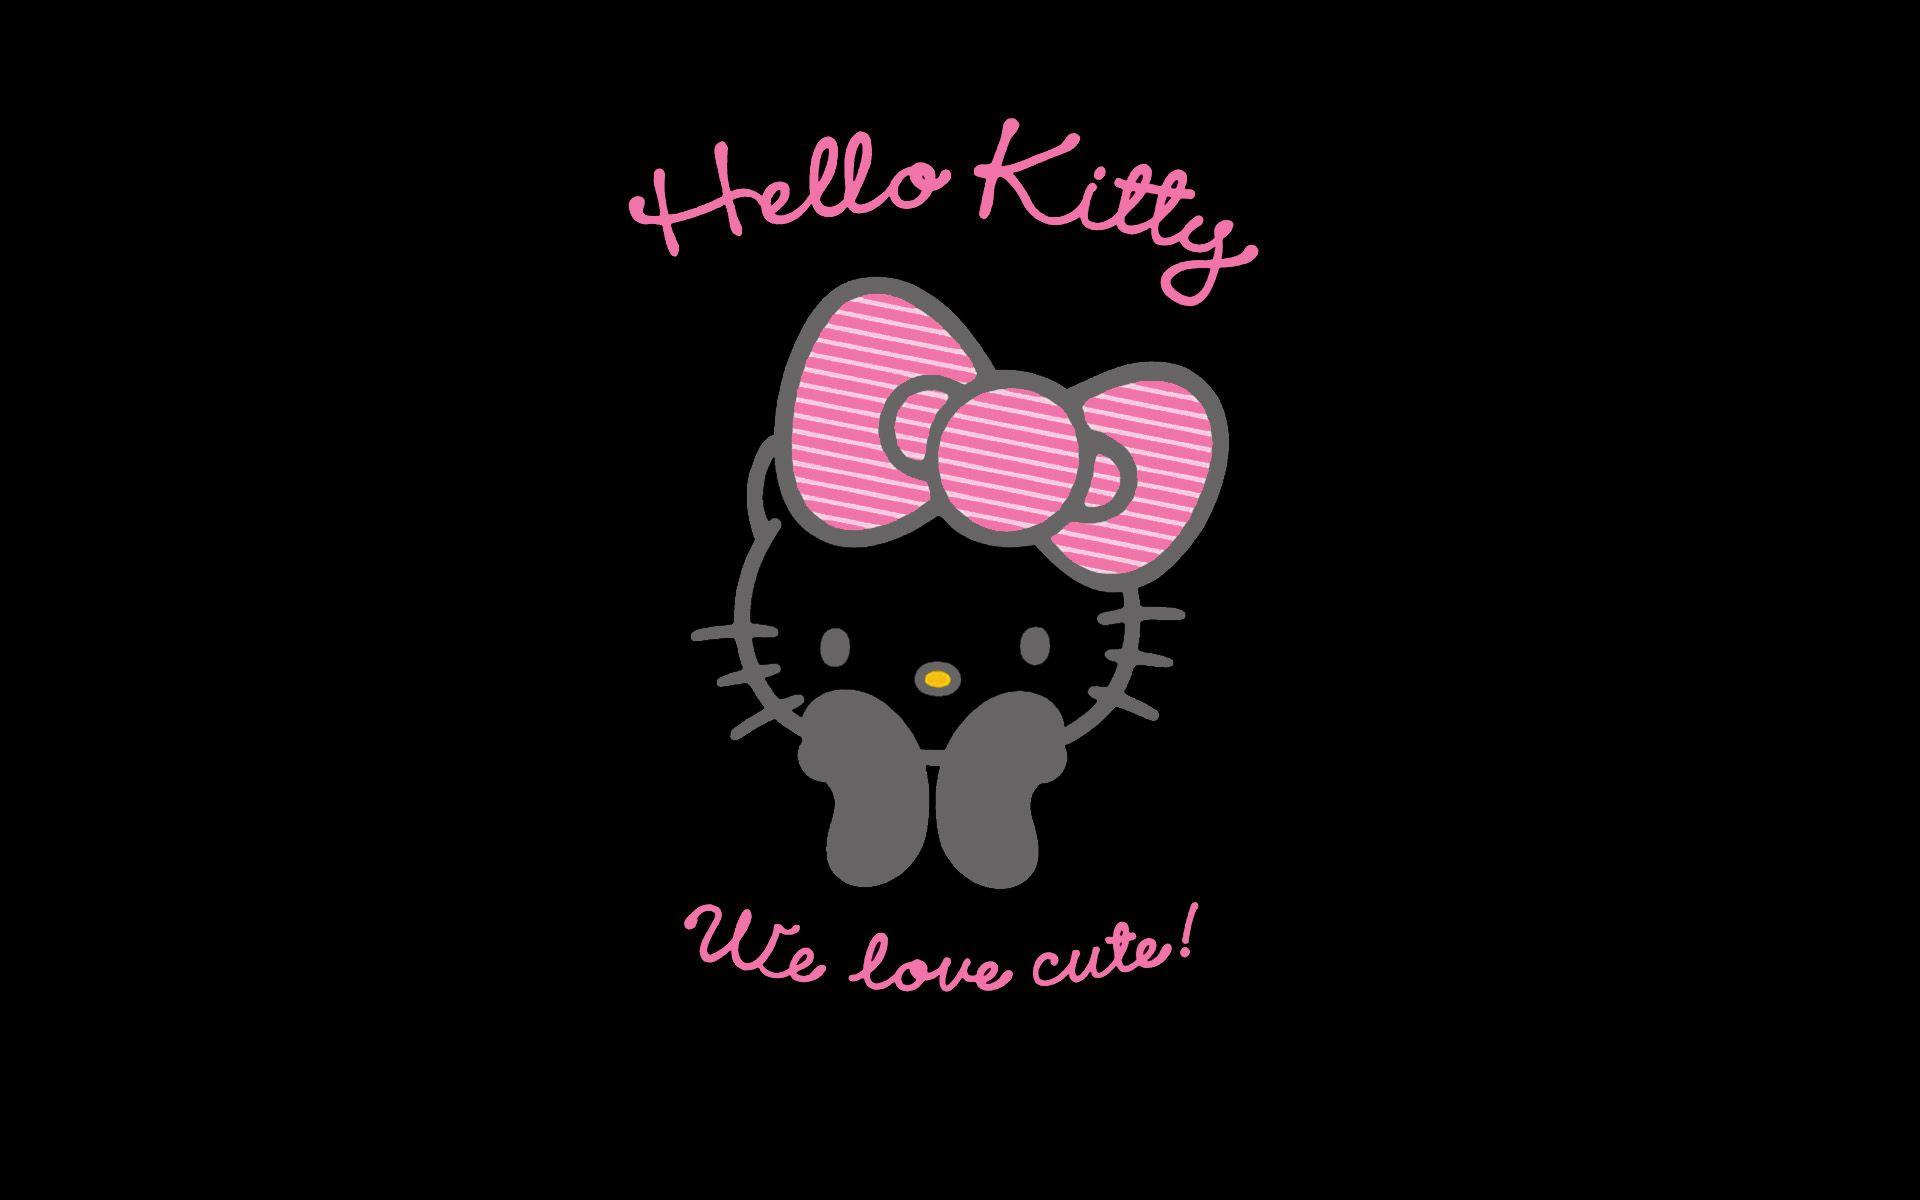 Hello Kitty Background 19 88193 High Definition Wallpaper. wallalay